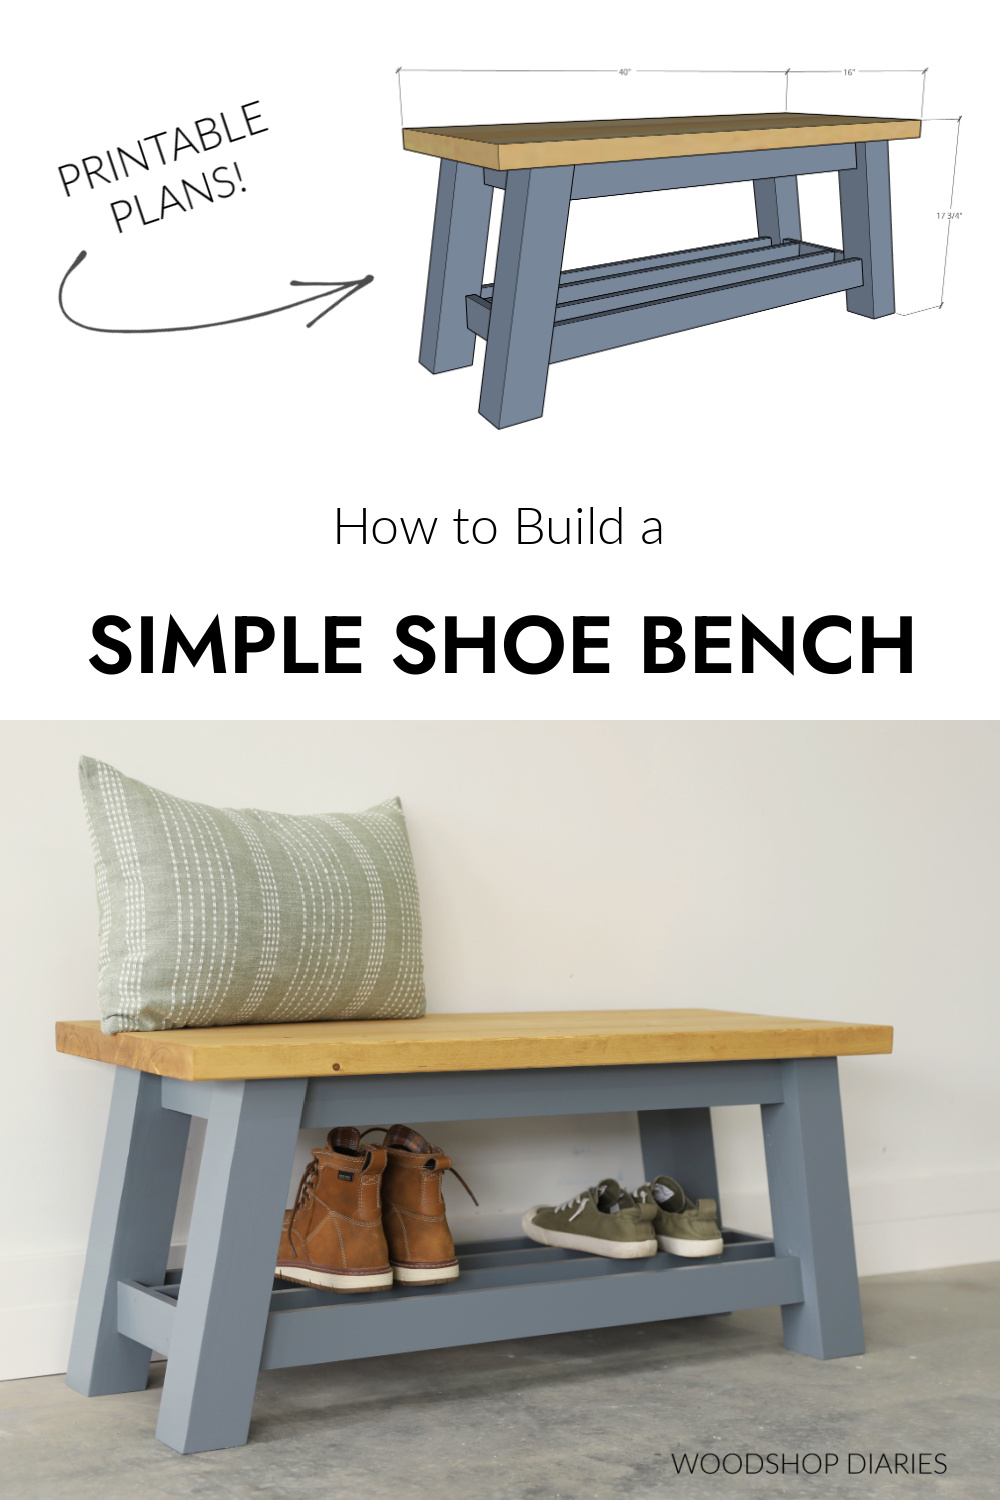 Pinterest collage image showing overall dimensional diagram at top with completed DIY shoe bench at bottom with text "how to build a simple shoe bench printable plans"